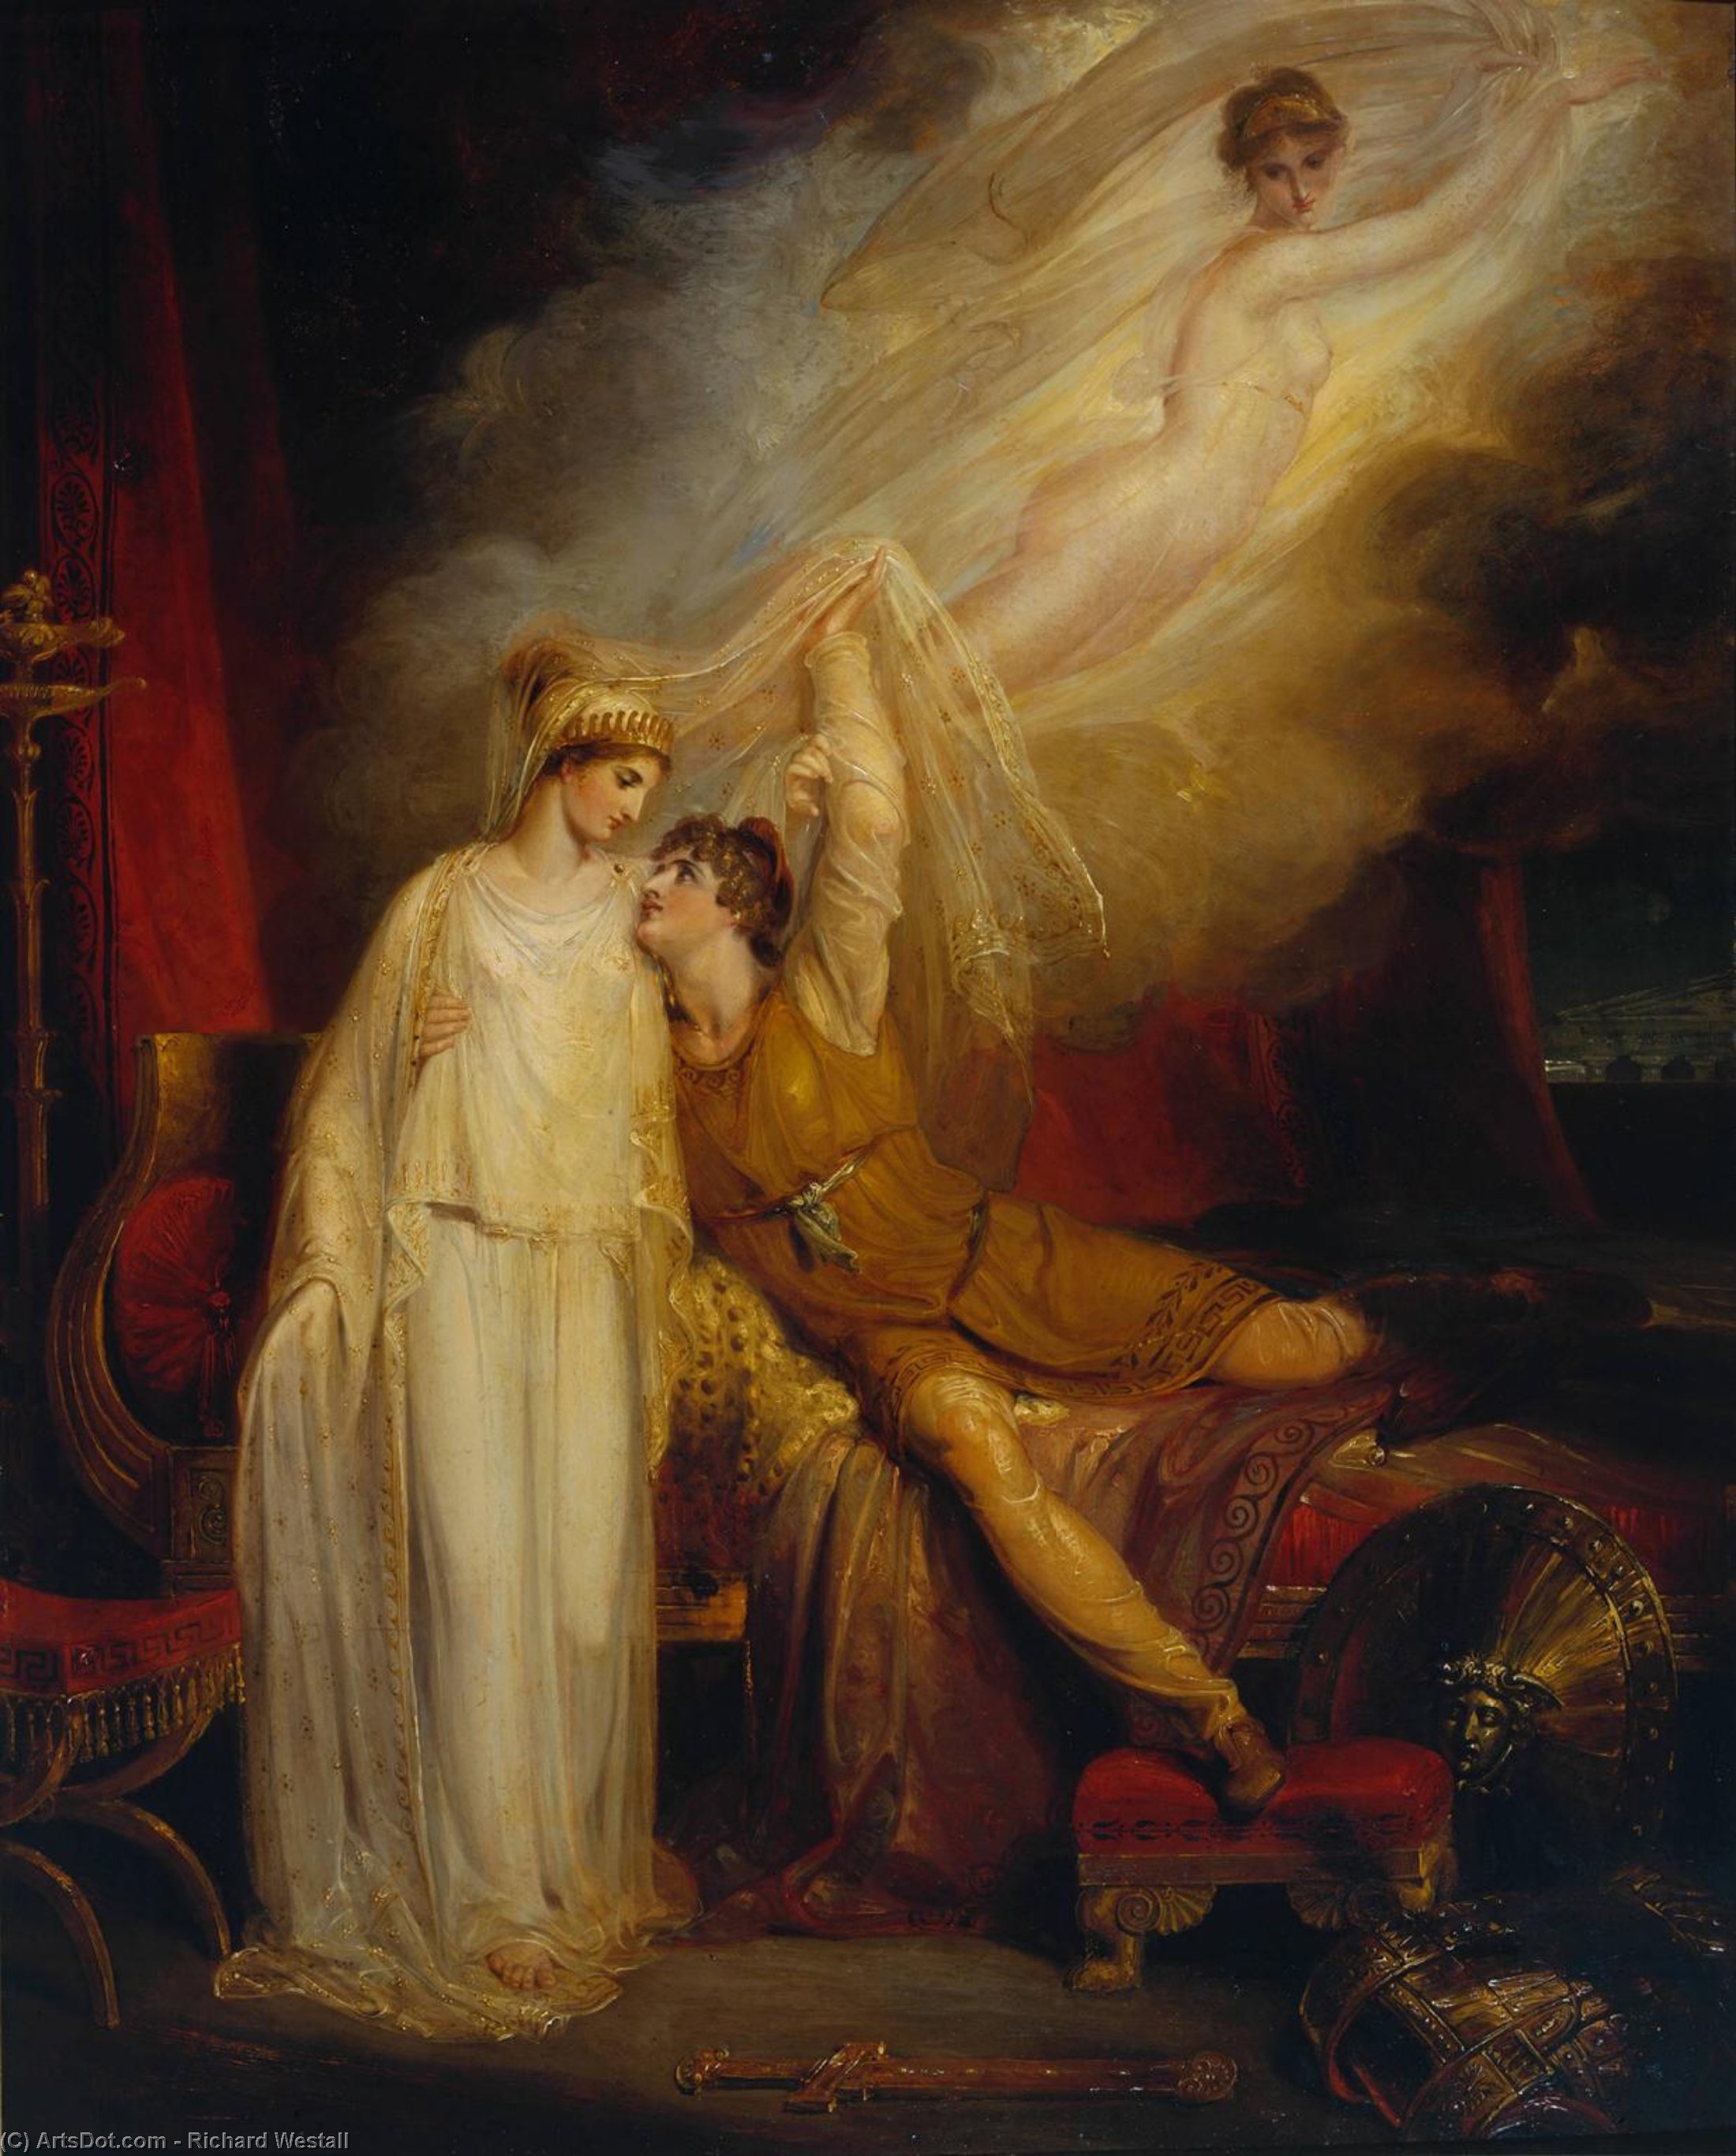 WikiOO.org - Encyclopedia of Fine Arts - Festés, Grafika Richard Westall - The Reconciliation Of Helen And Paris After His Defeat By Menelaus